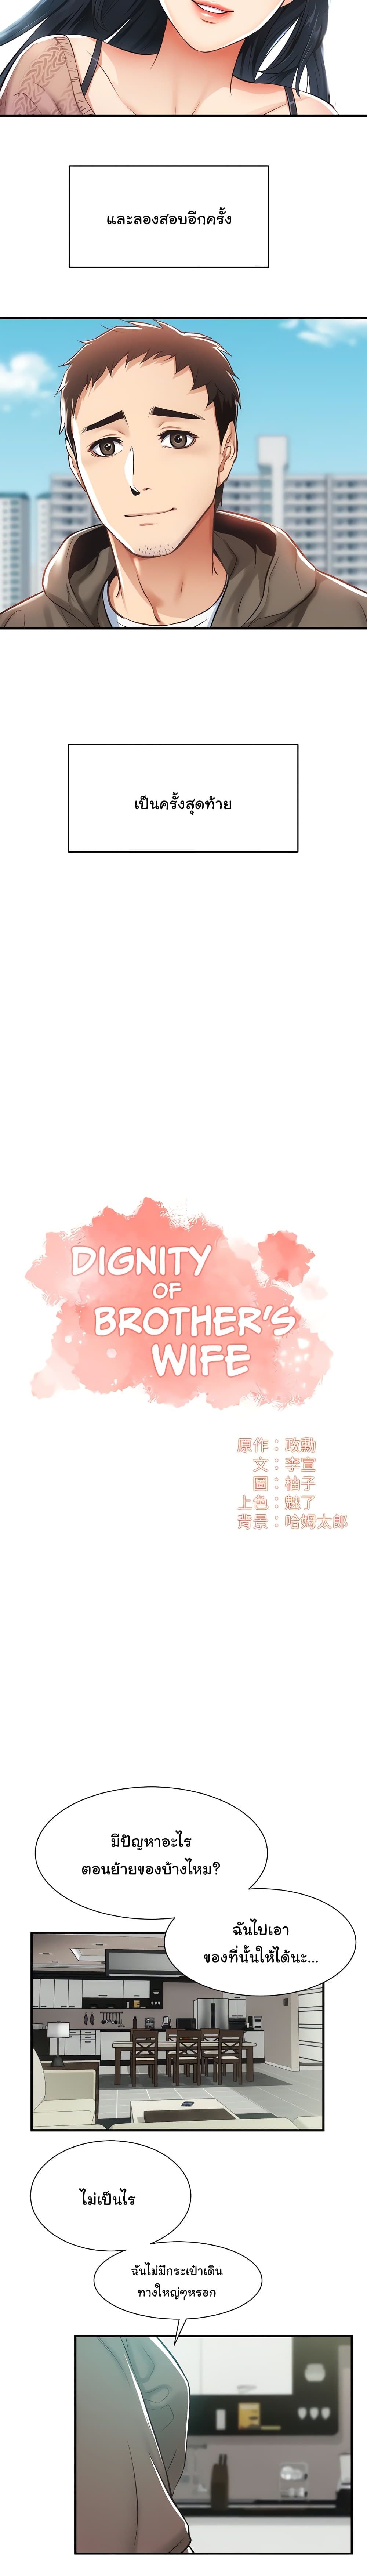 Brother's Wife Dignity 9-9